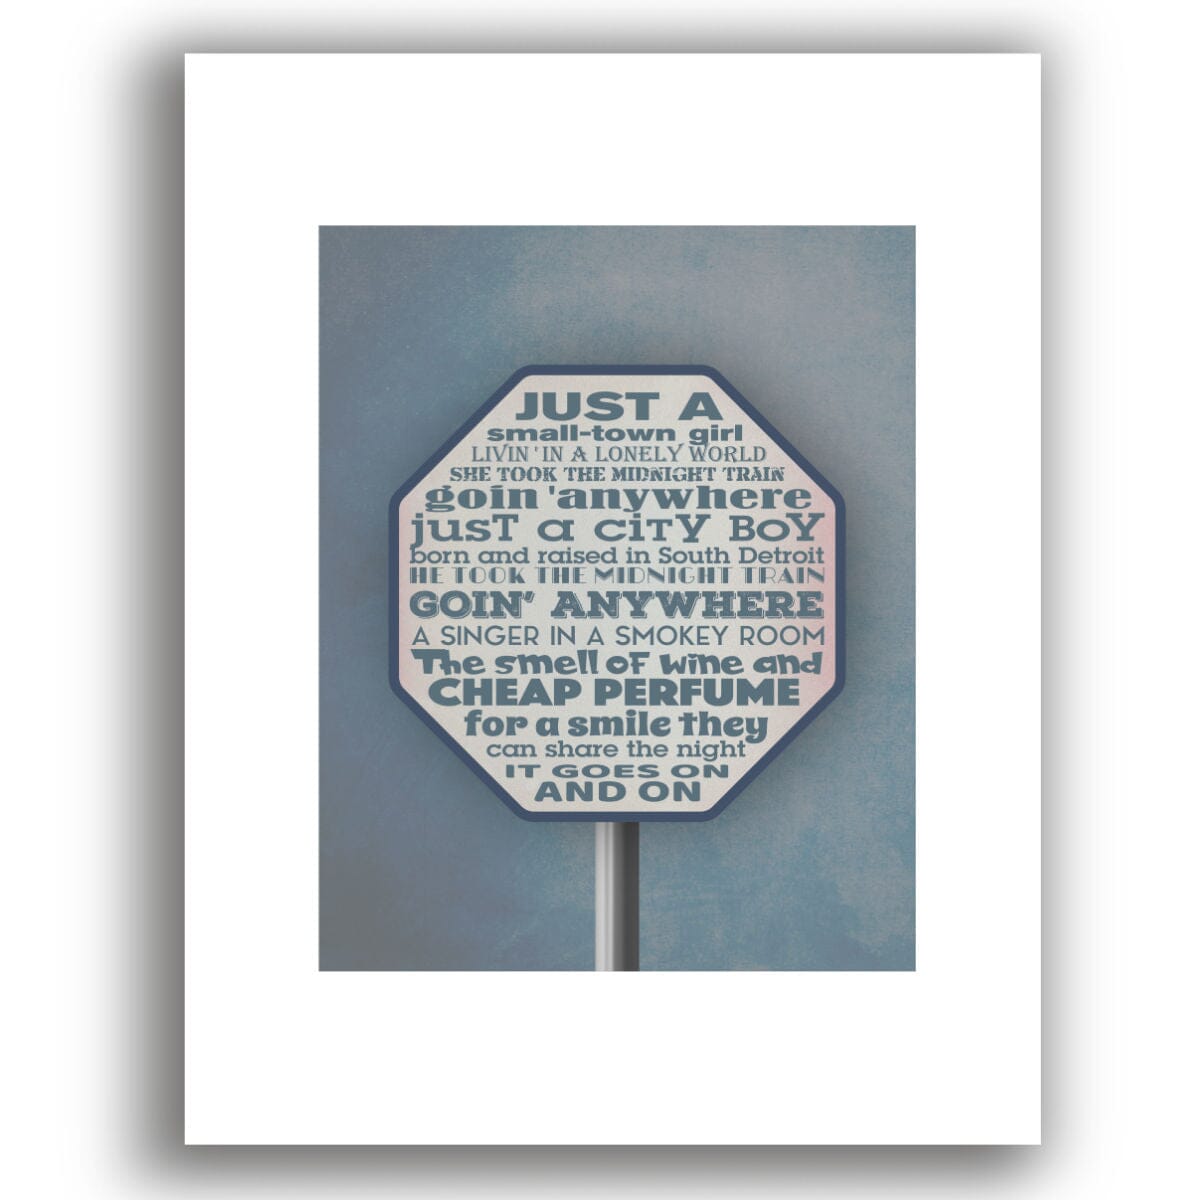 Don't Stop Believin' by Journey - Love Song Ballad Lyric Art Song Lyrics Art Song Lyrics Art 8x10 White Matted Print 